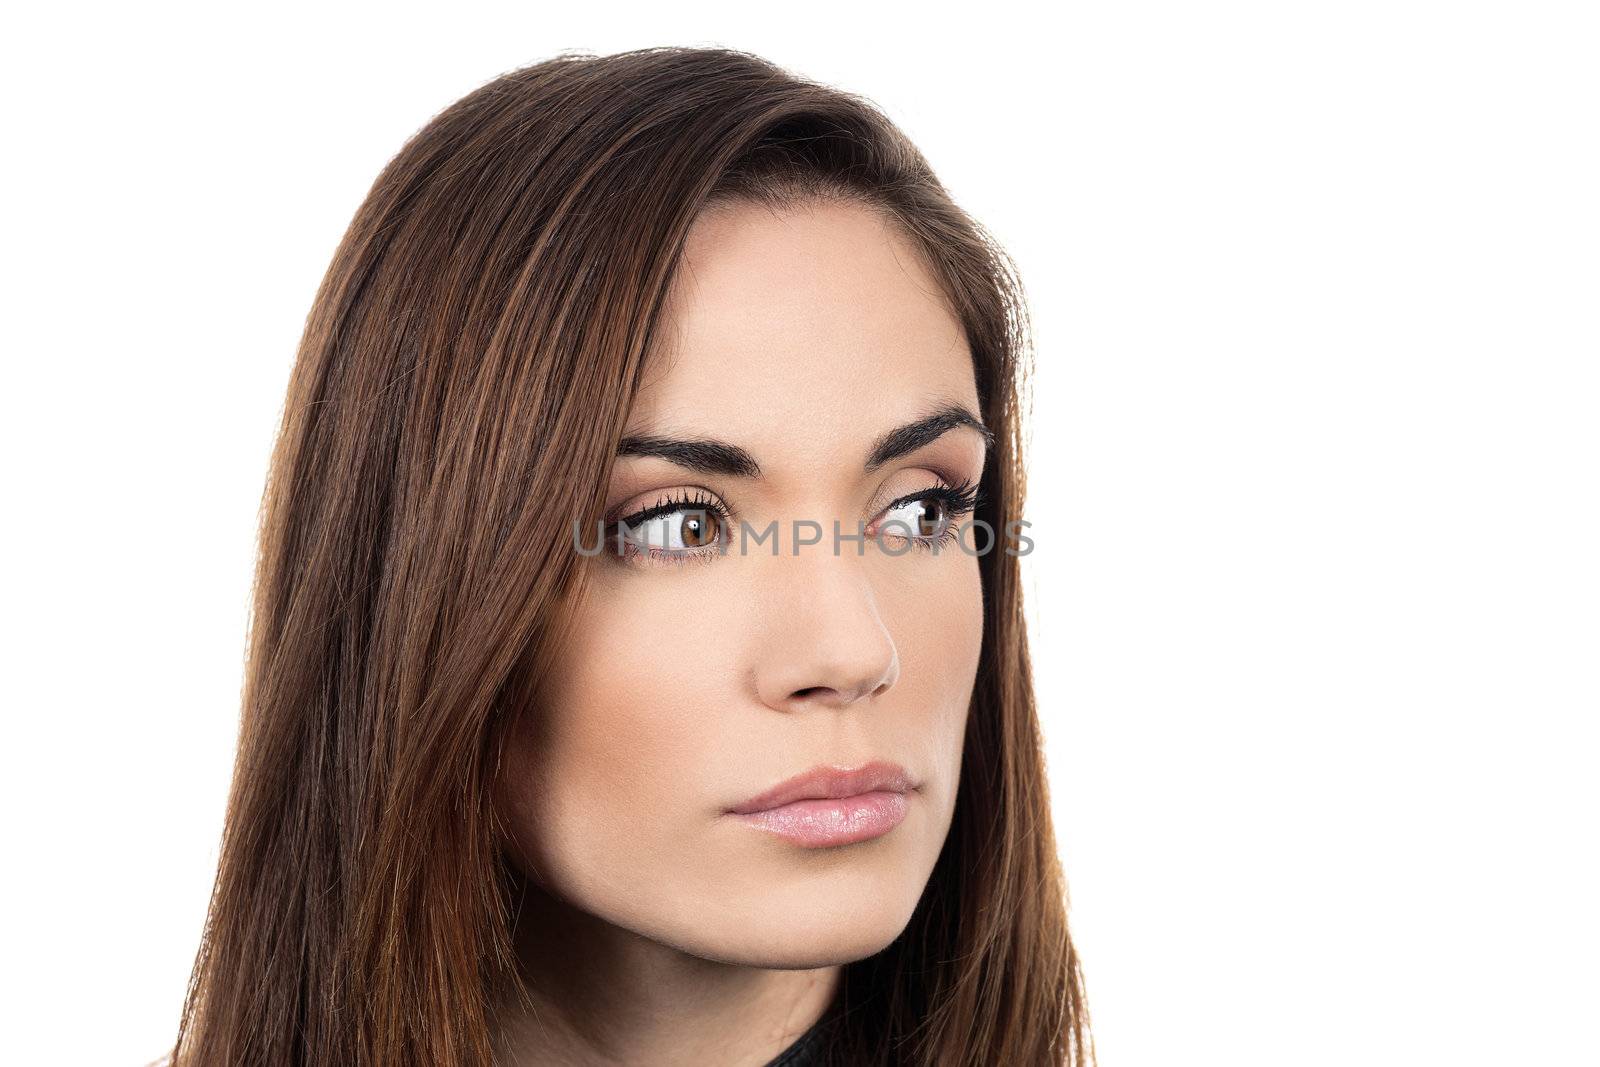 young sad pensive woman on white background